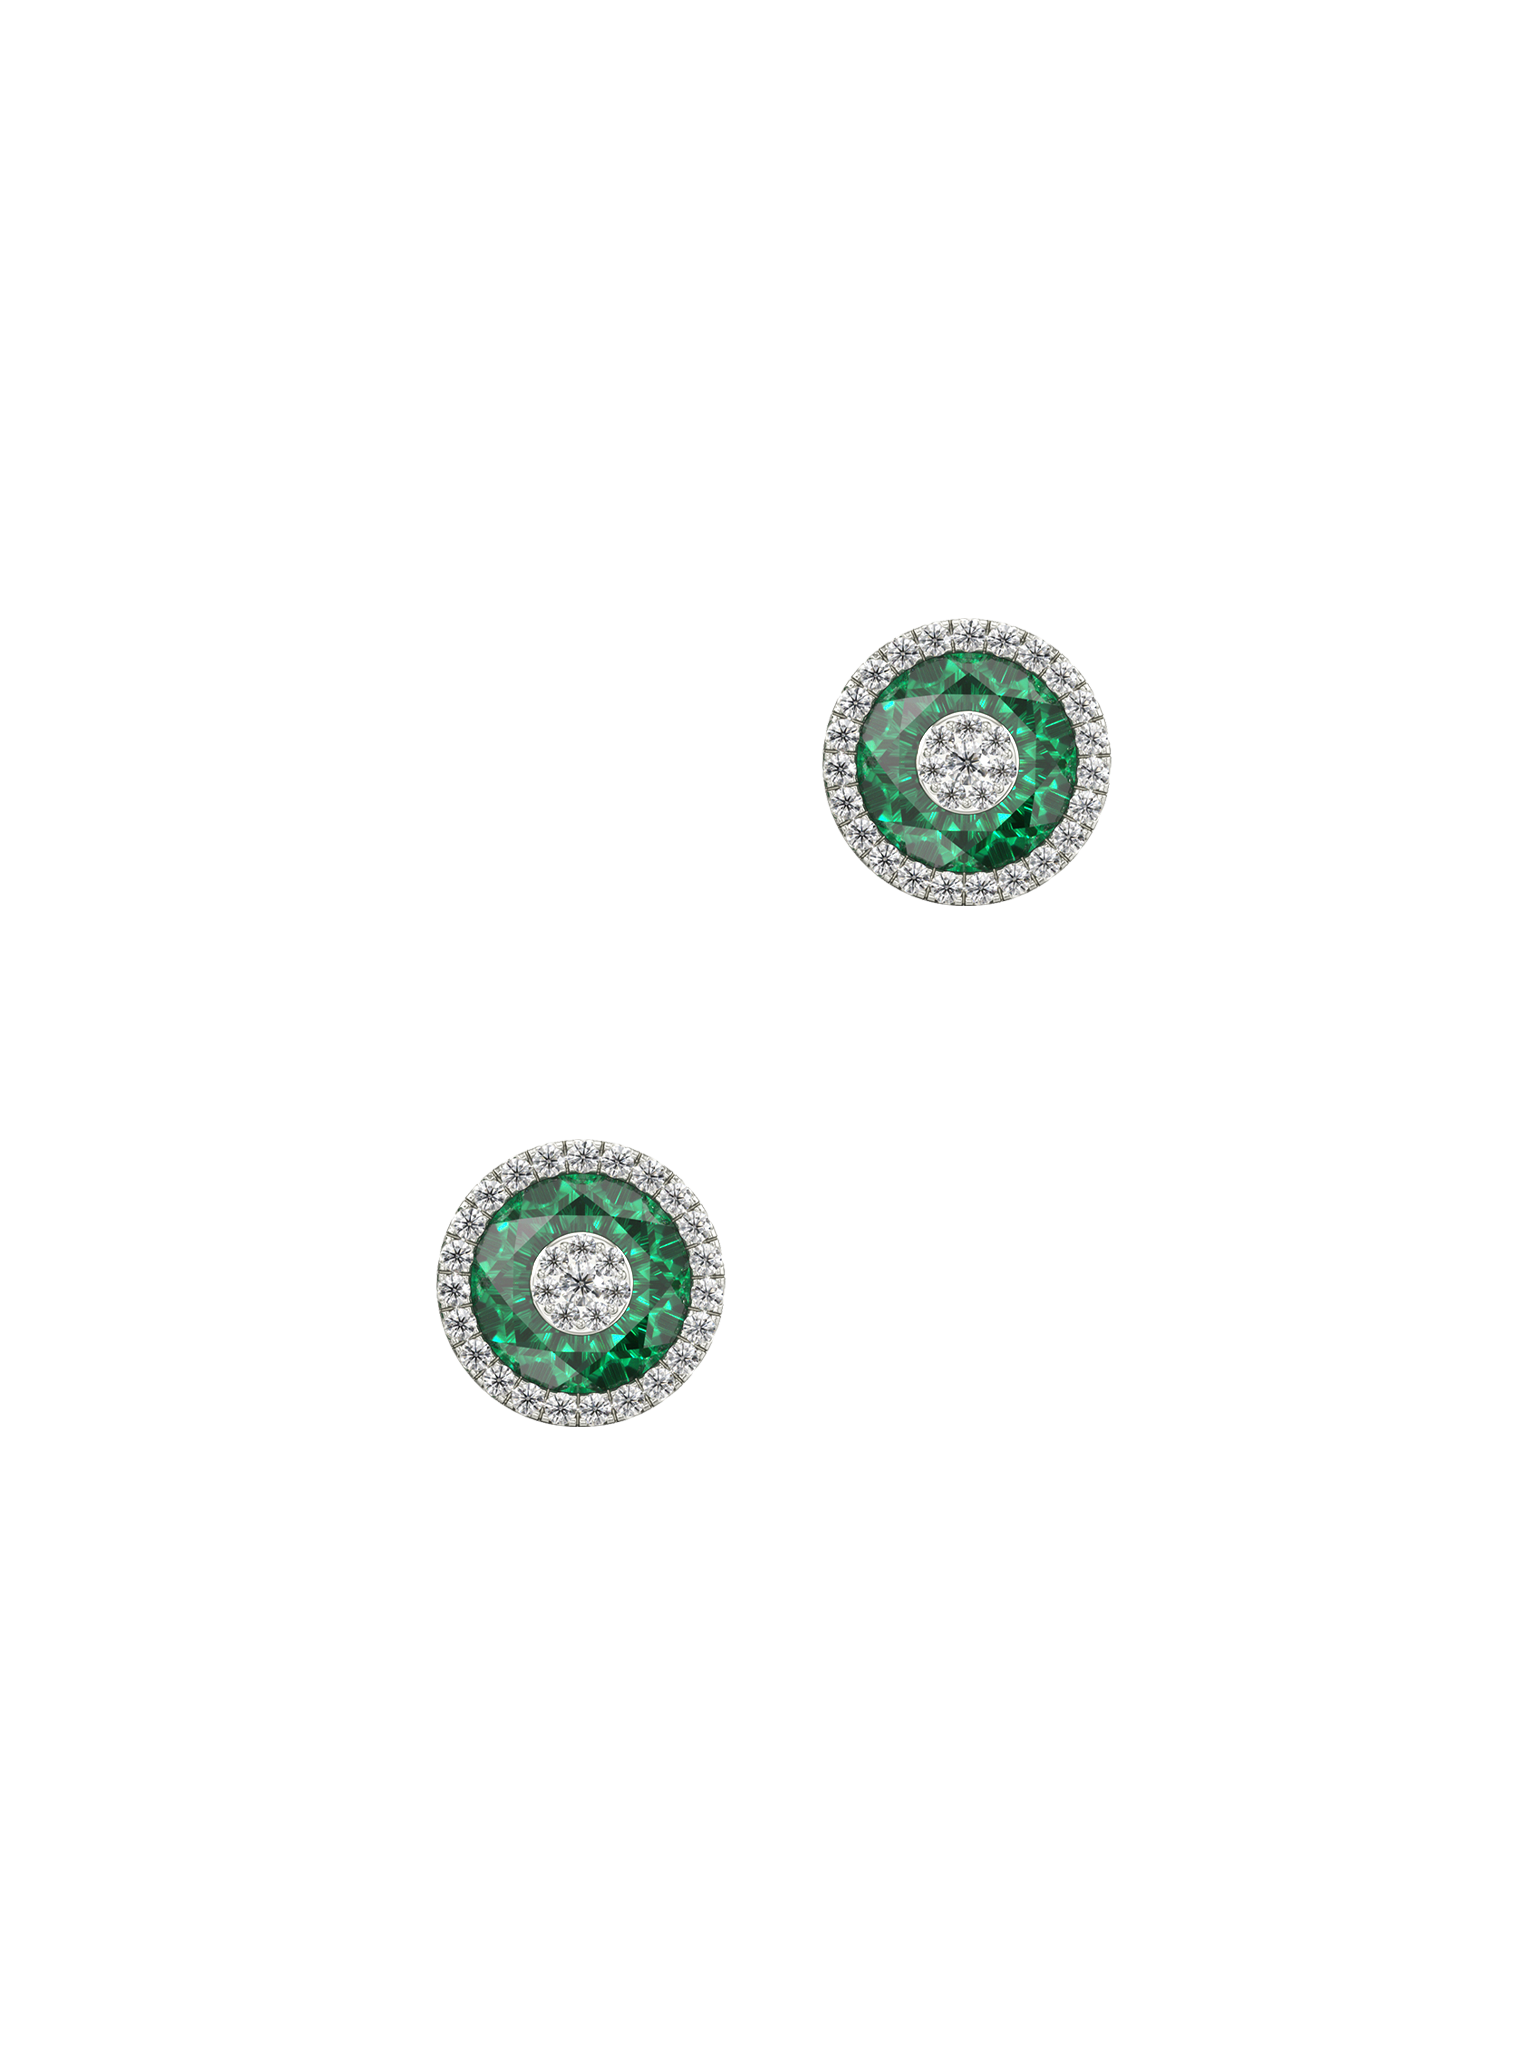 One collection 7mm fusion emerald diamond halo studs